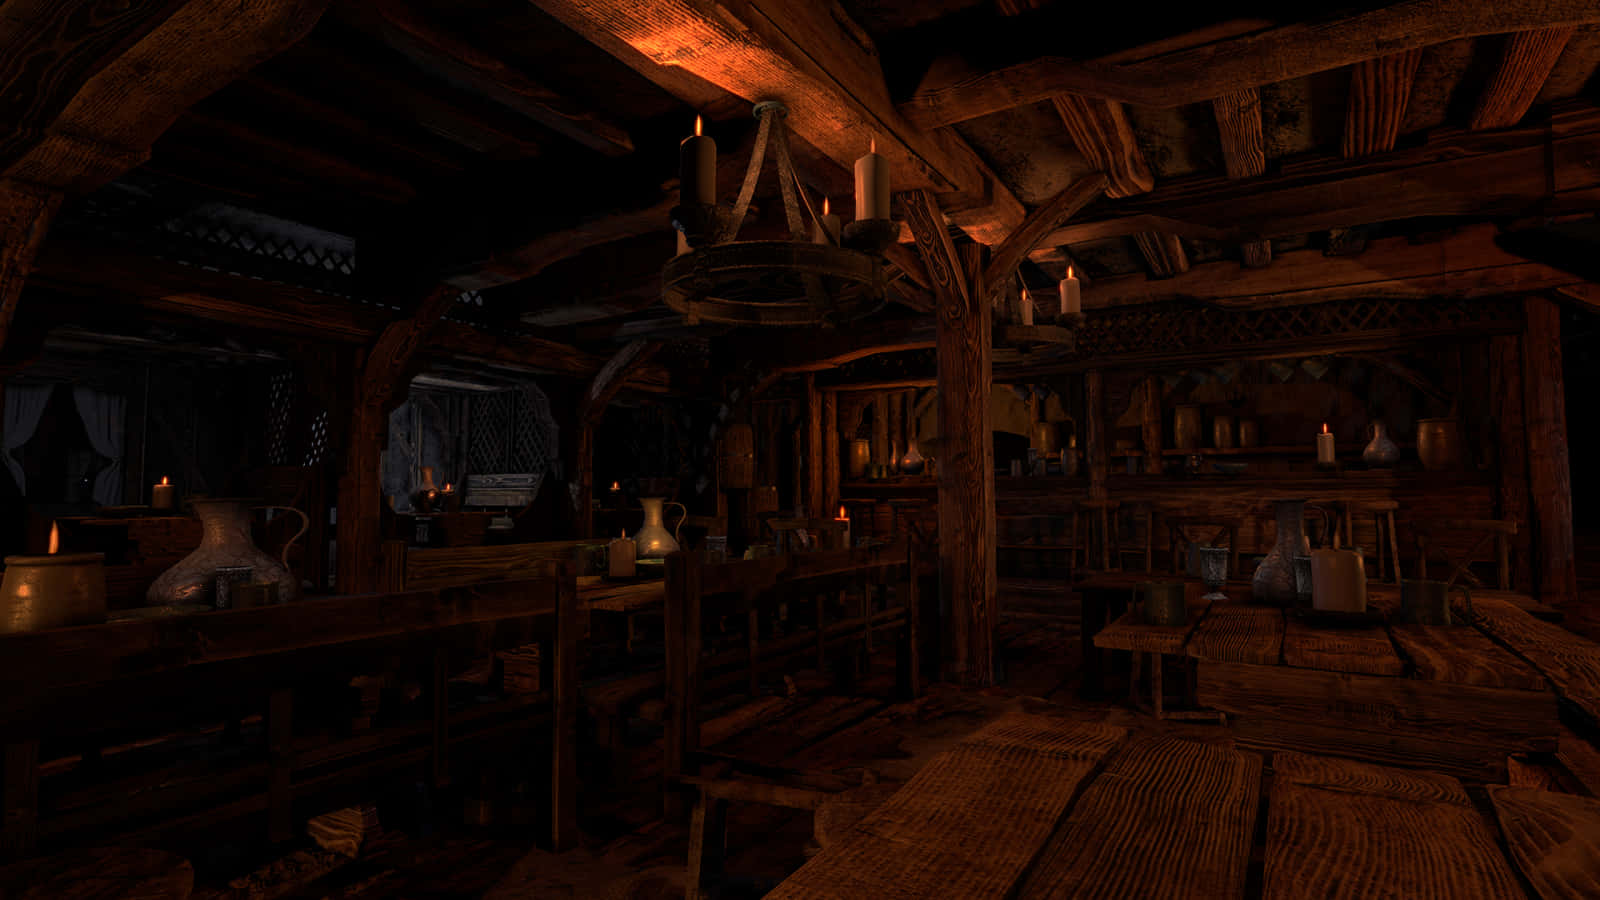 Cozy evening at the tavern